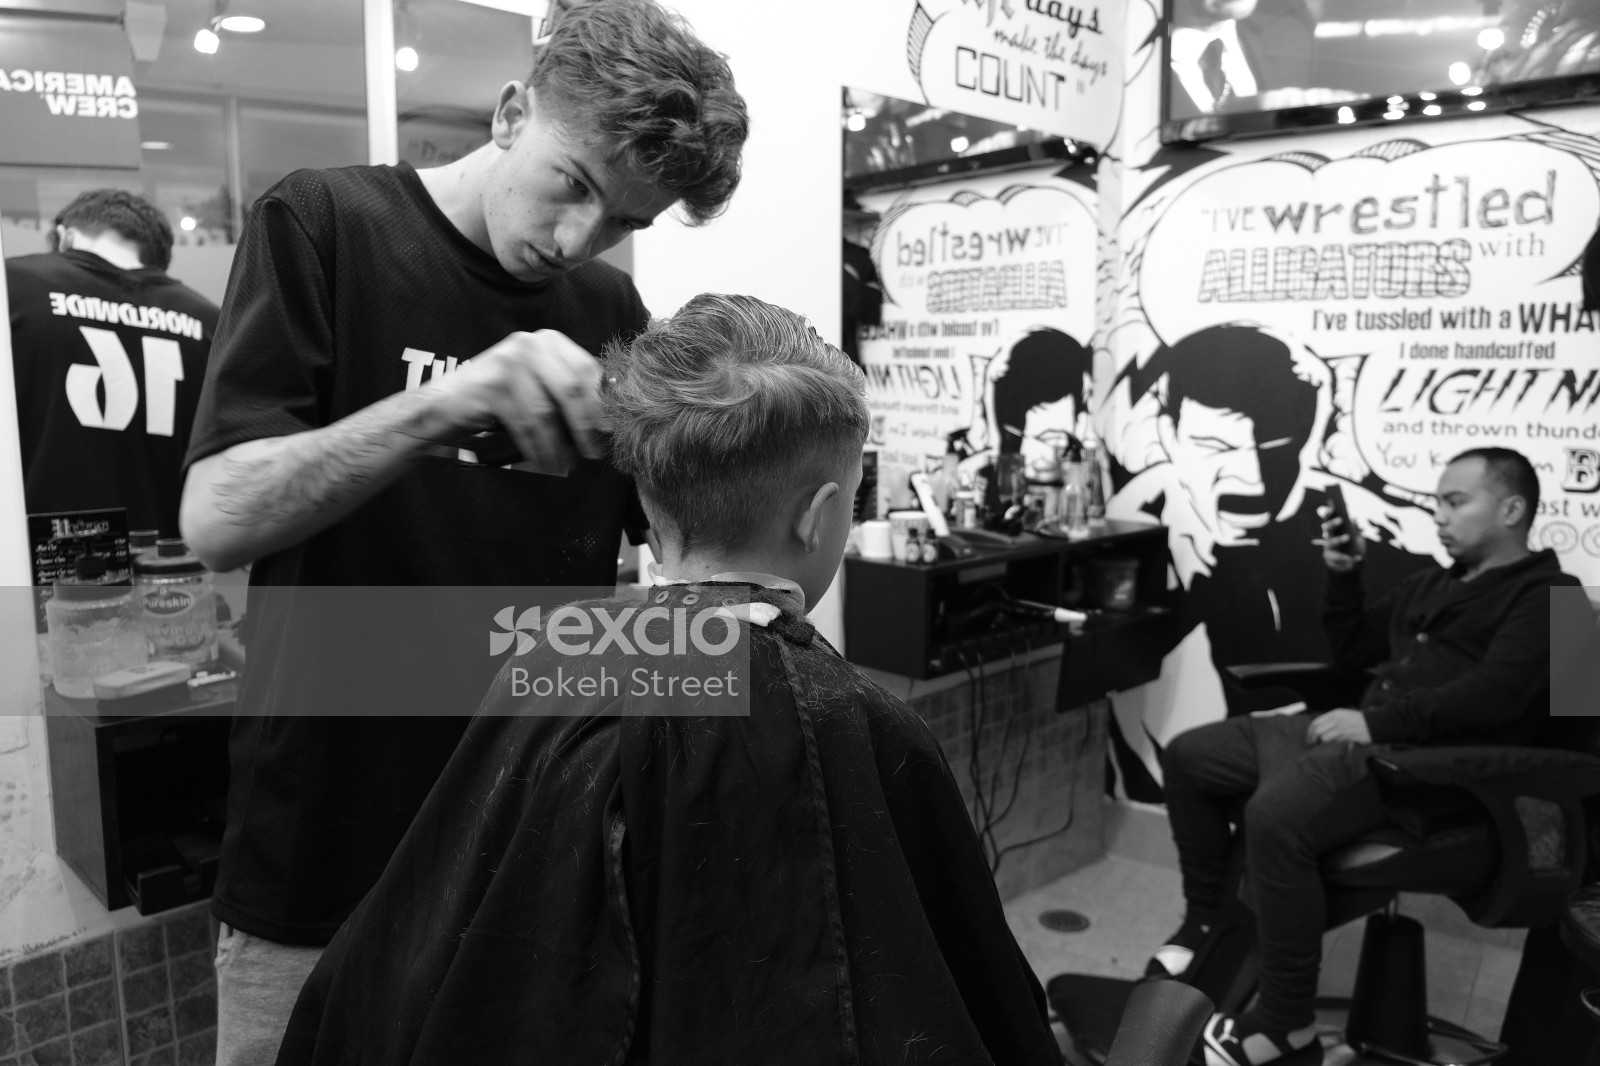 Barber giving a haircut to the boy black and white